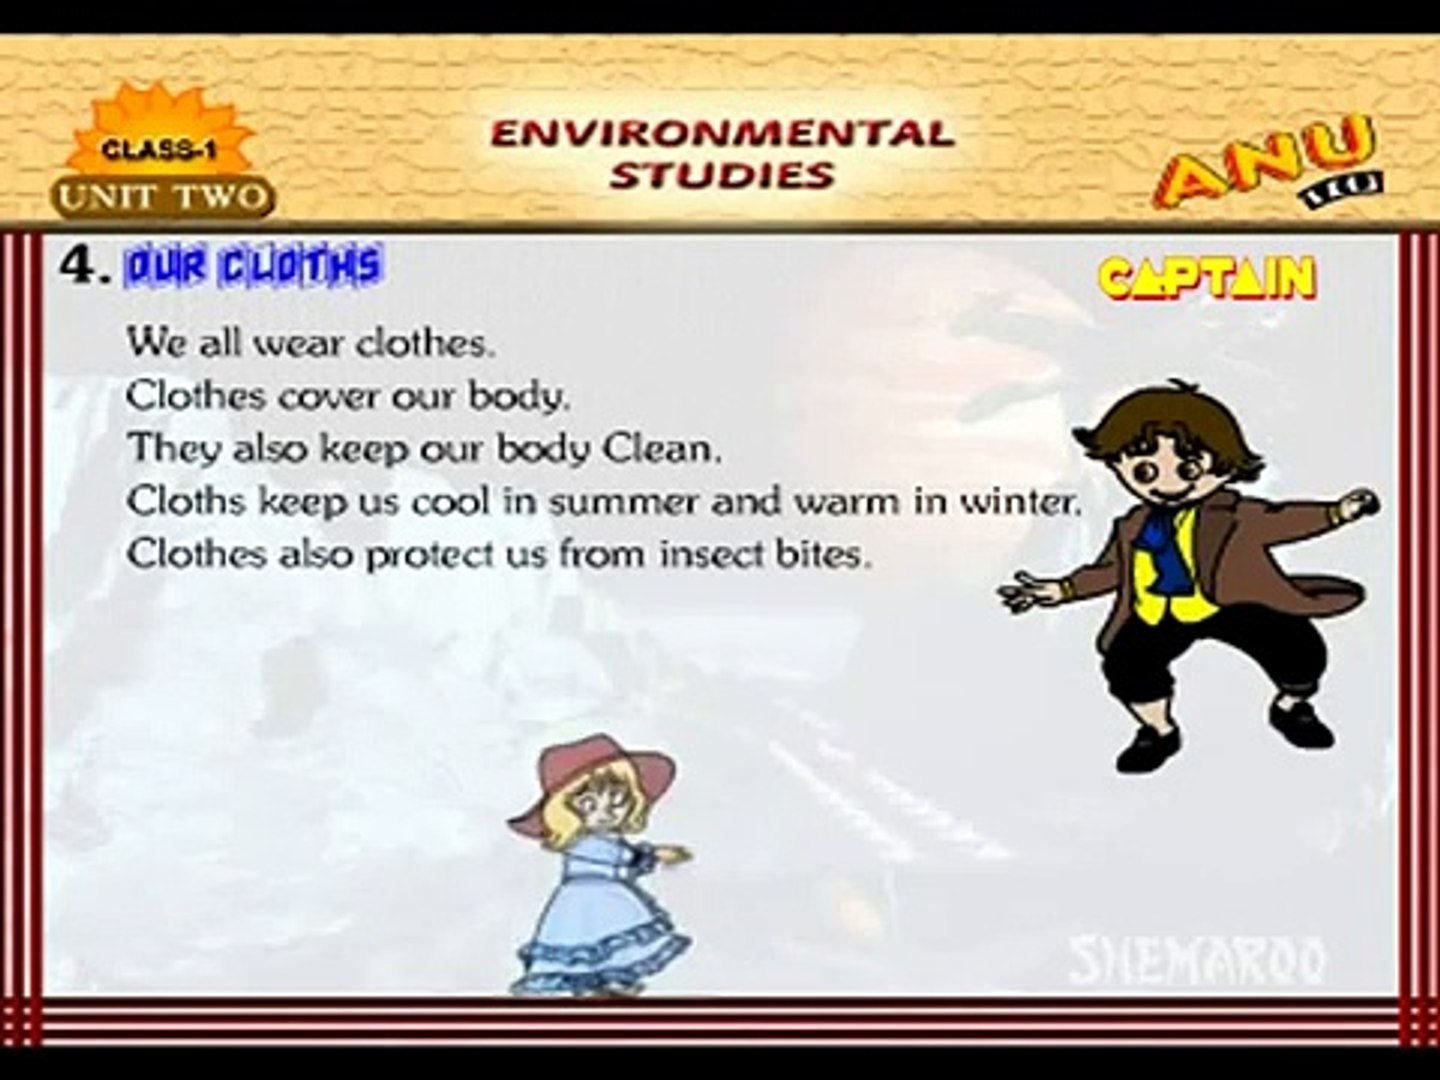 Looking for some great educational videos for your kids? Look no further than Kids Educational Video